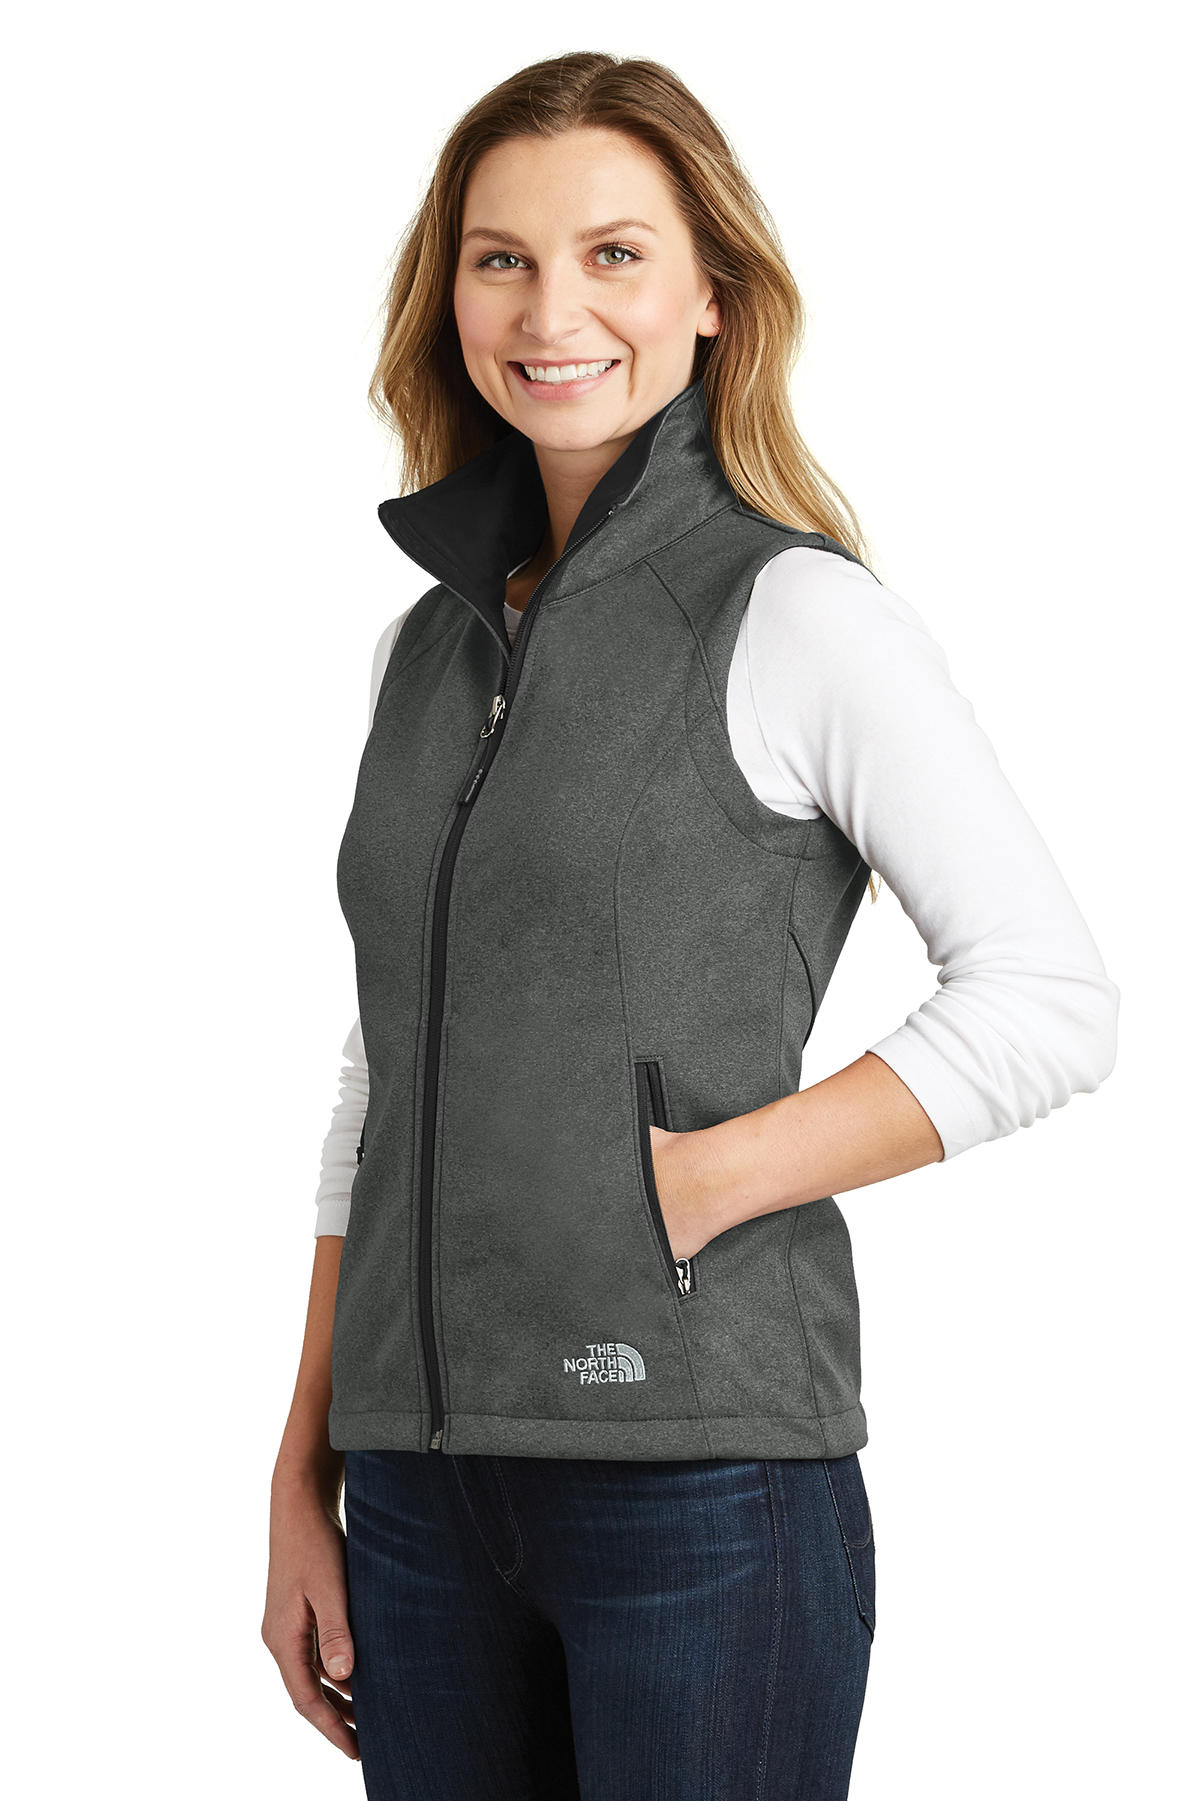 The North Face ® Ladies Ridgewall Soft Shell Vest | Product | Company ...